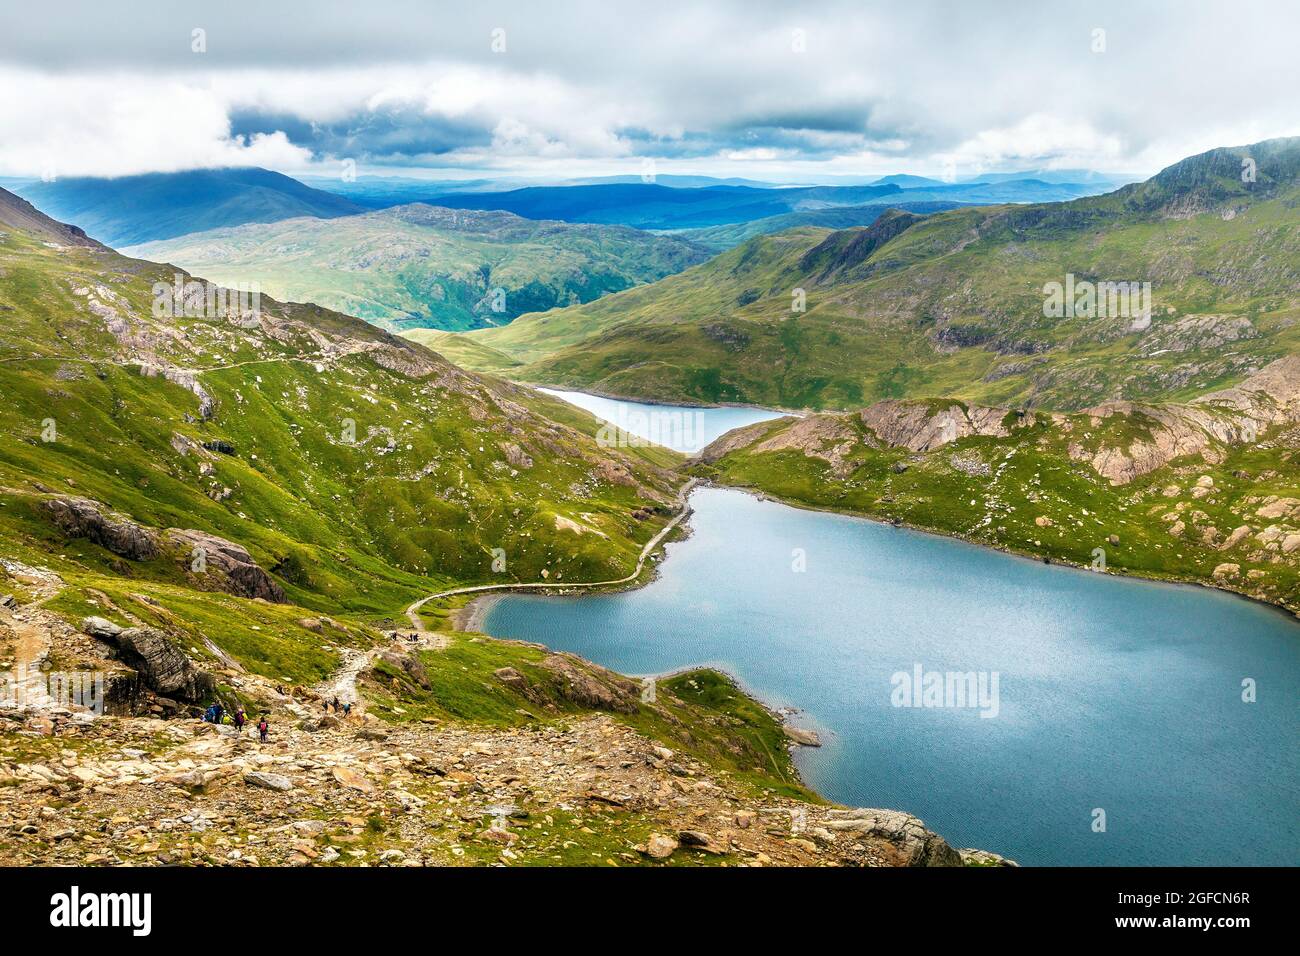 View of Glaslyn lake and Llyn Llydaw lake further back from the trail towards Snowdon summit, Snowdonia National Park, Wales, UK Stock Photo